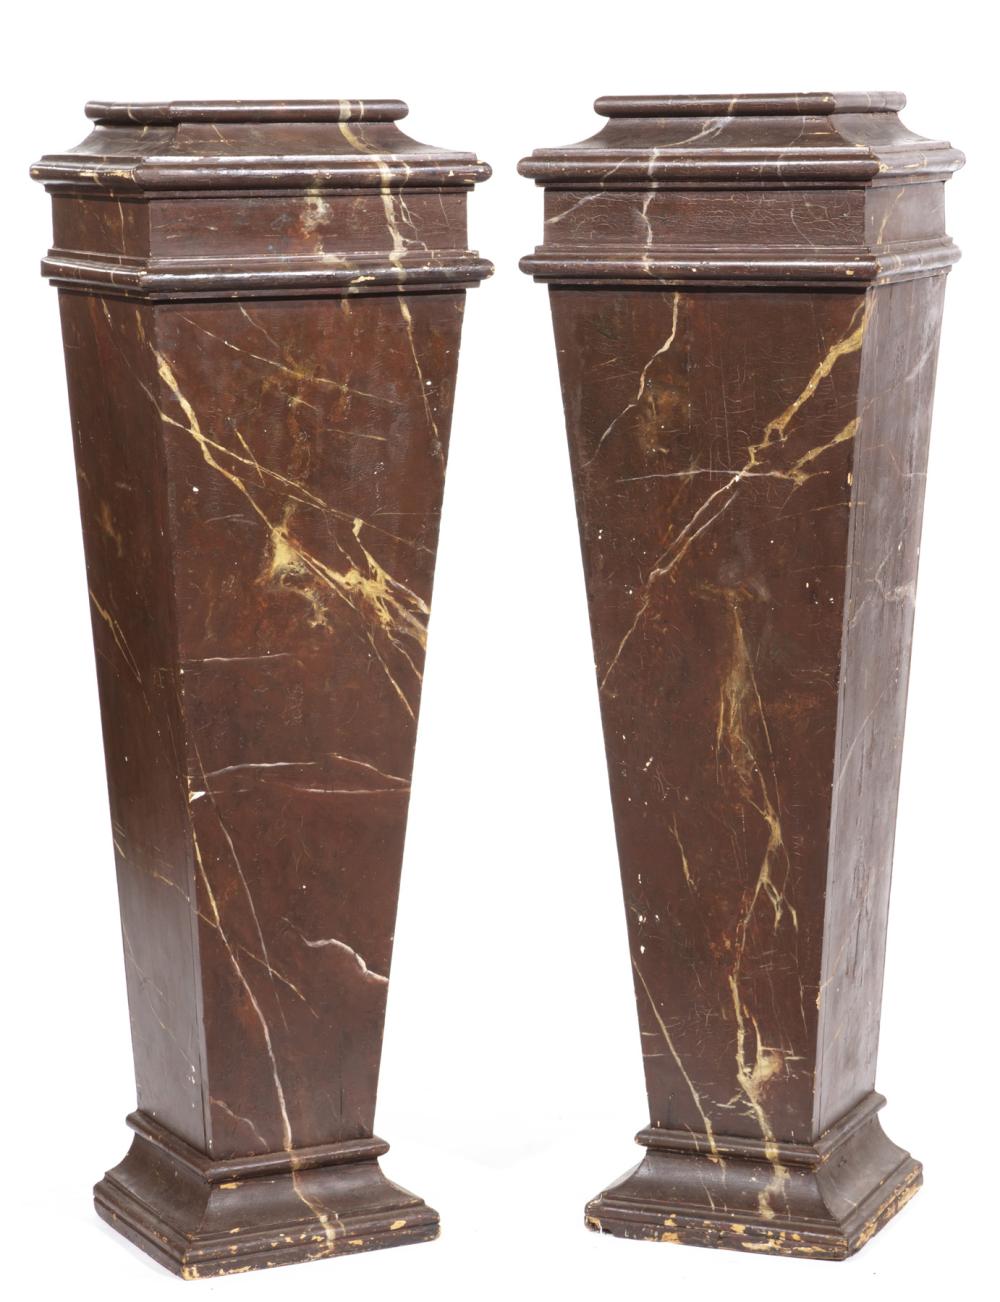 PAIR OF CONTINENTAL FAUX MARBRE